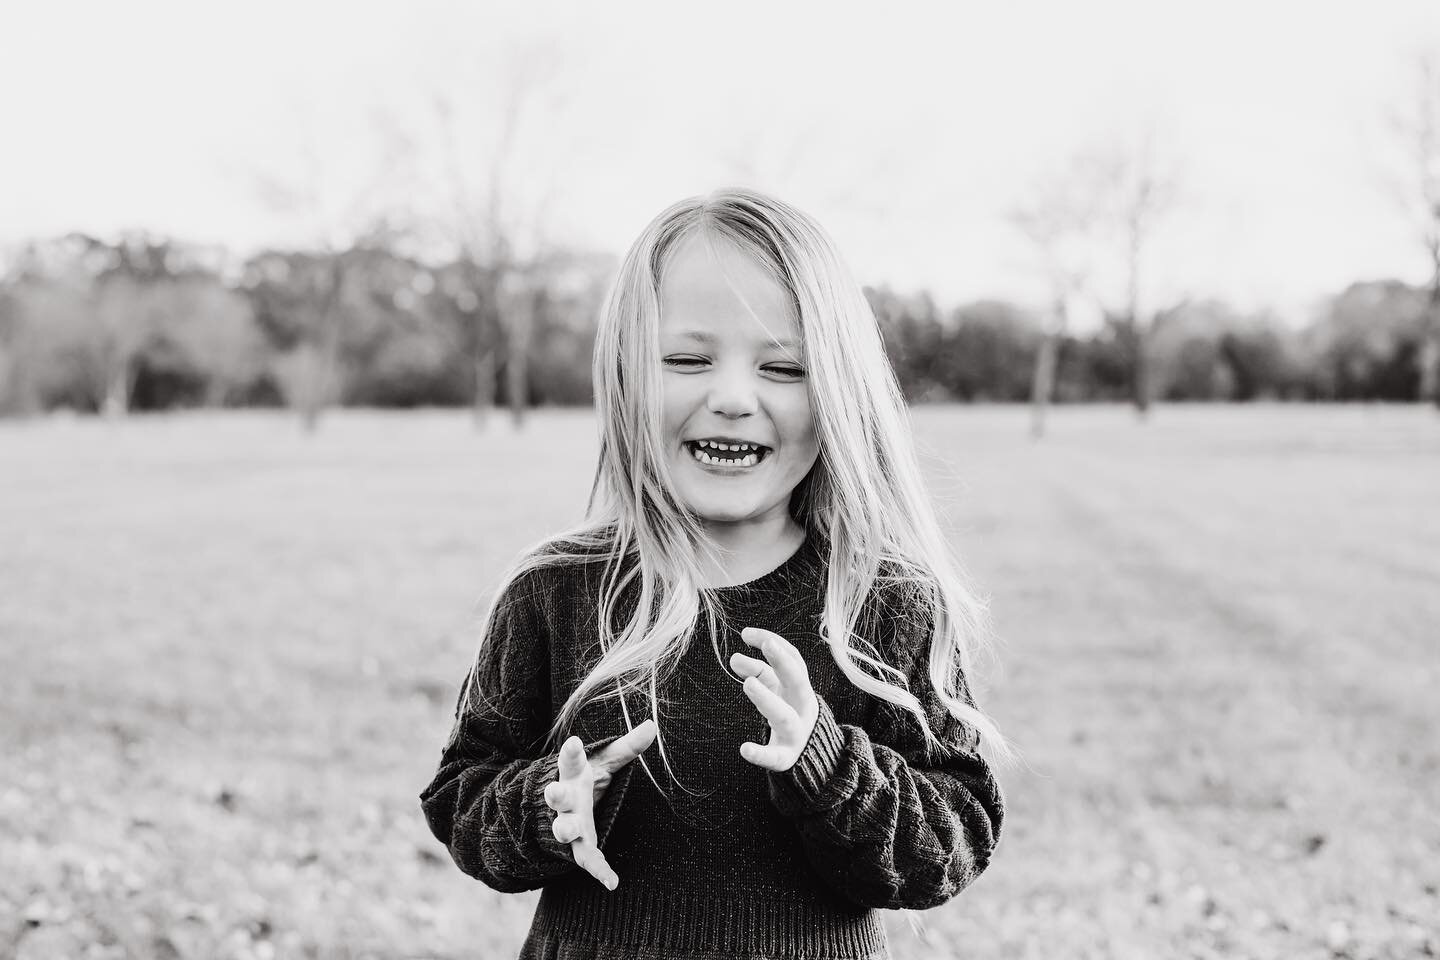 All smiles for a new year 🥳🤩
Here&rsquo;s to a great 2024!
&bull; &bull; &bull;
#newyear #portrait #portraitphotography #familyphotographer #portraitphotographer #twincitiesphotographer #newyeargoals #toddlerphotography #blackandwhitephotography #c